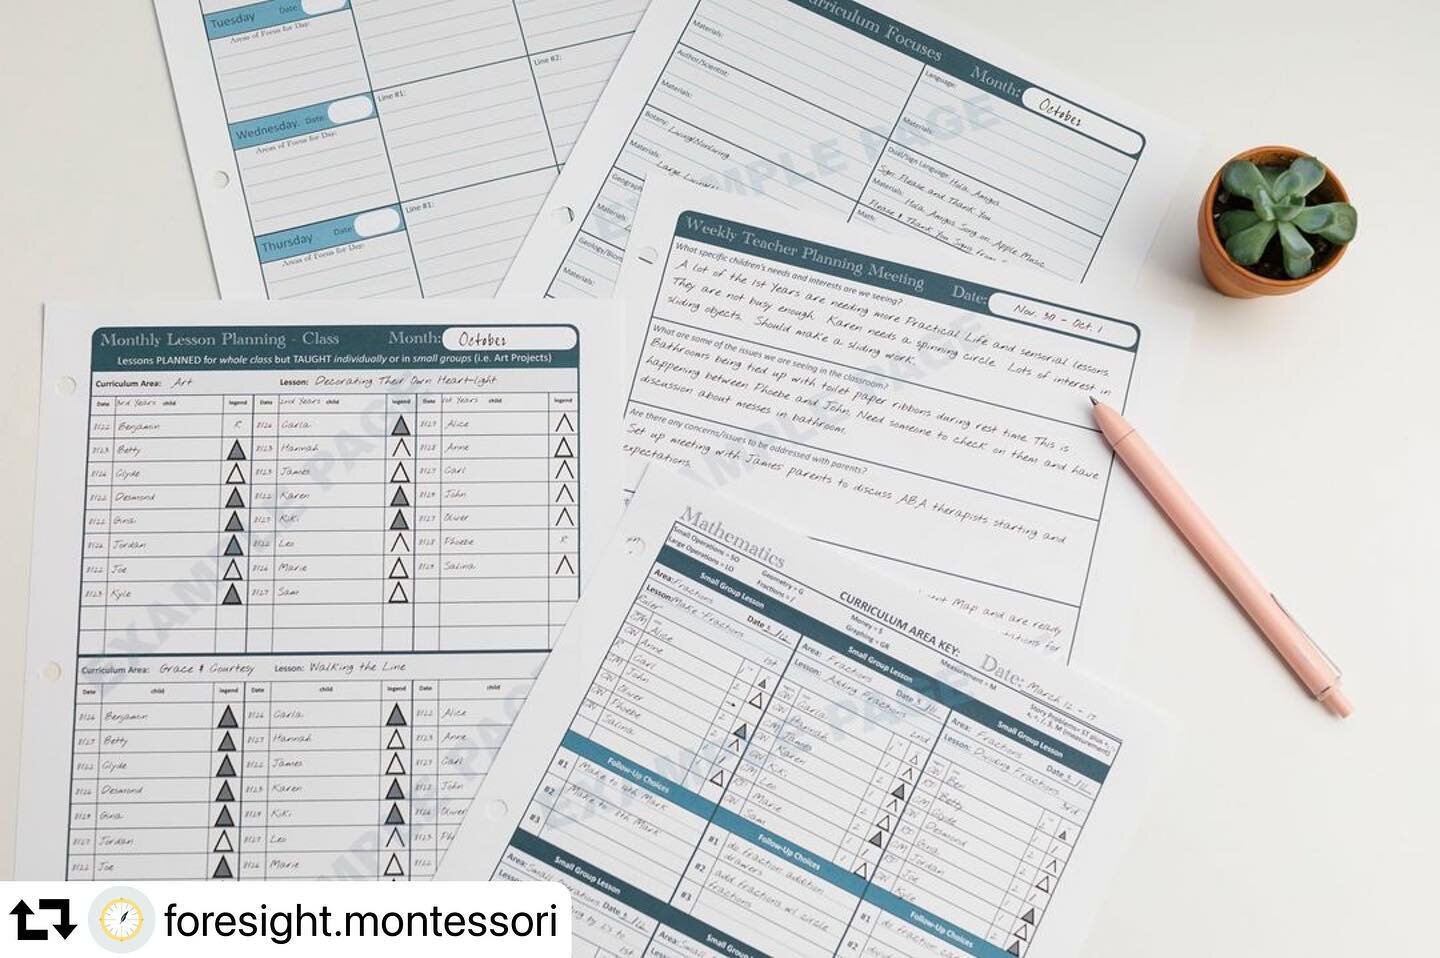 #repost @foresight.montessori
・・・
All 4 of us have searched and searched for teaching planners that worked for the Montessori classroom to no avail. Does this sound familiar to you too? Well we&rsquo;ve created planners with everything in one place&m